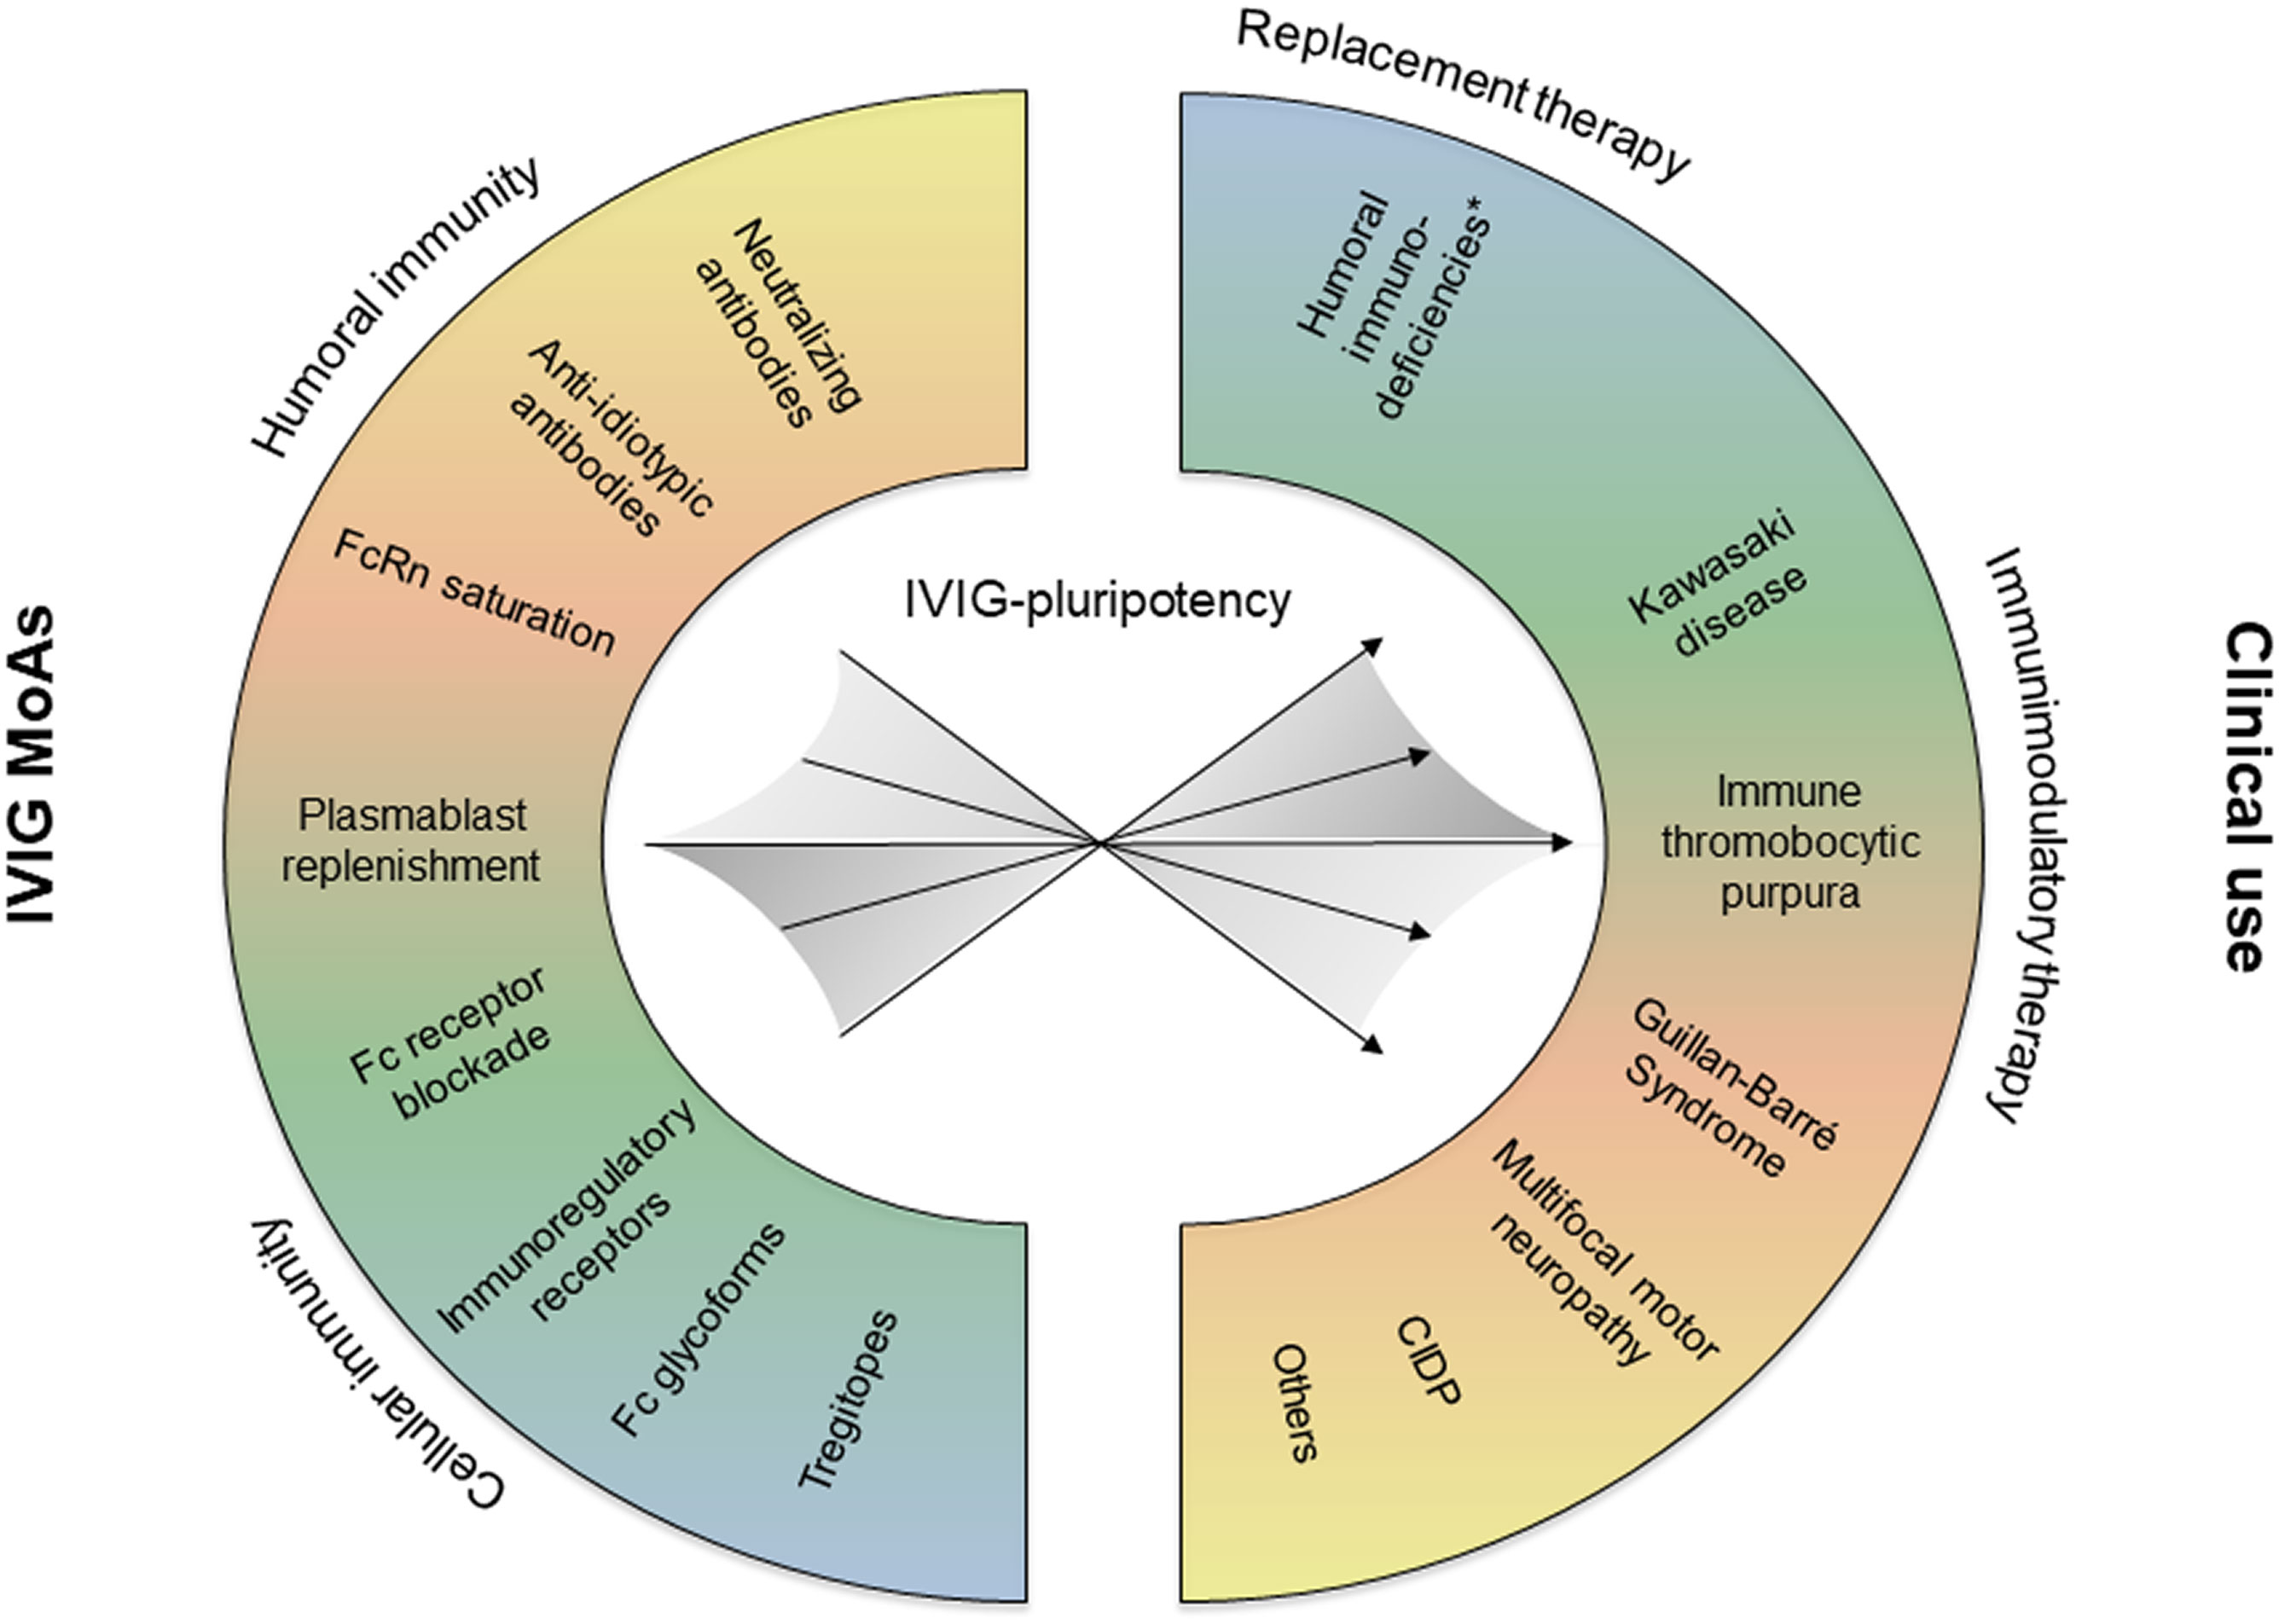 Microbial ecology perturbation in human IgA deficiency